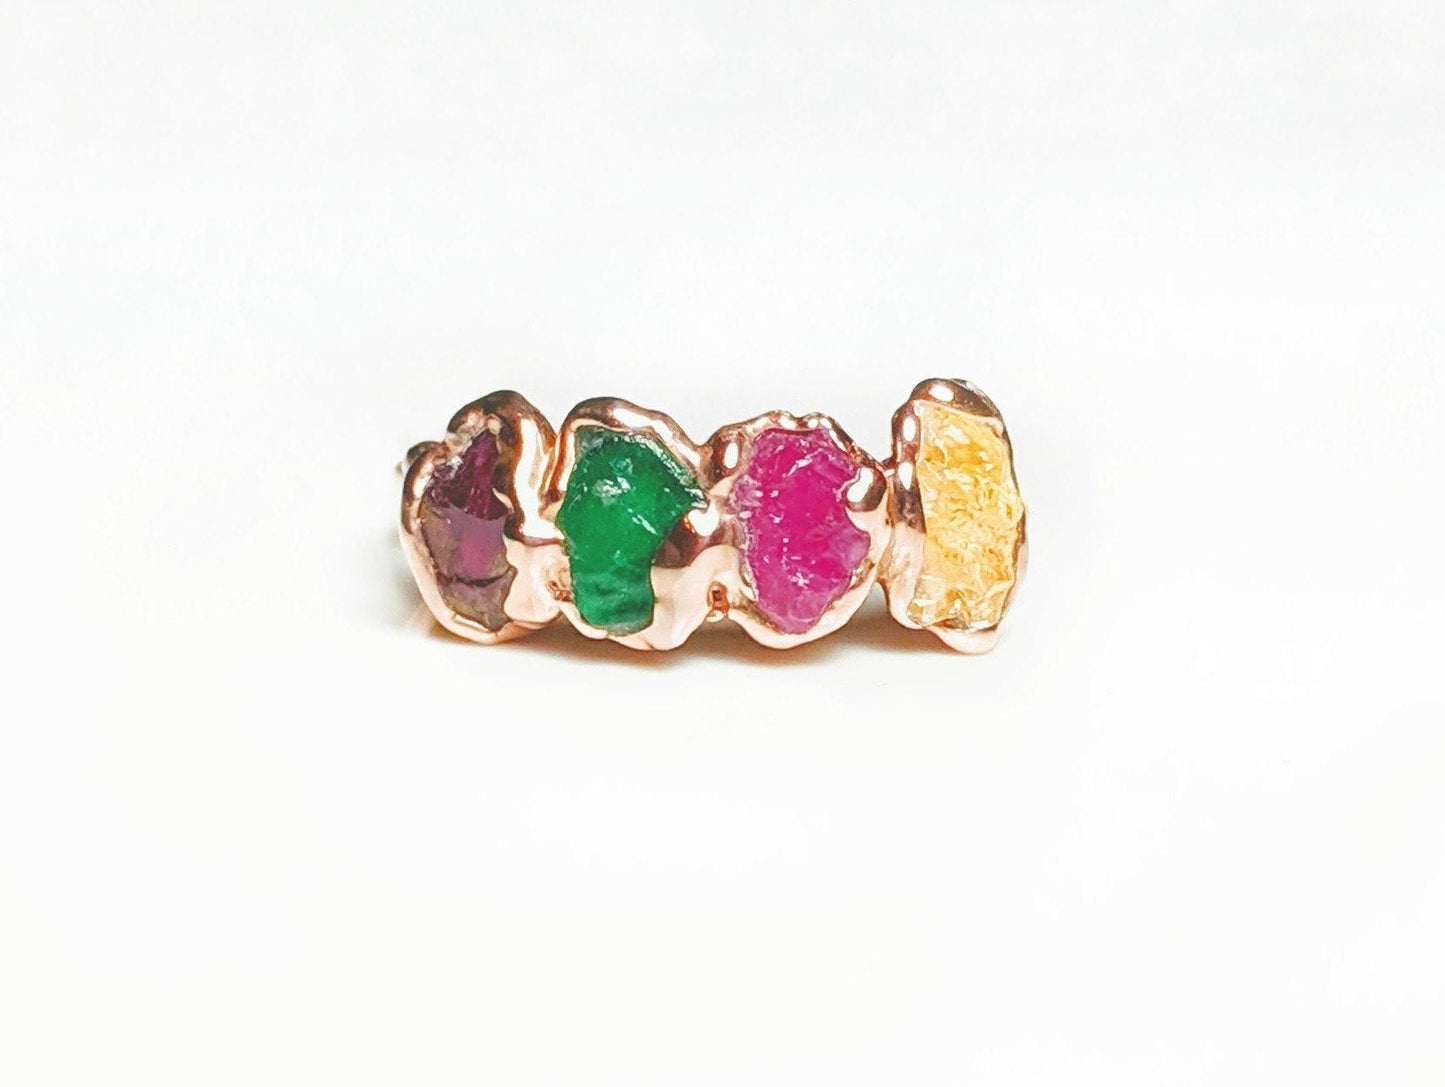 Raw 4-stone Mother's ring ~ Family Birthstone ring in unique 18k Gold setting